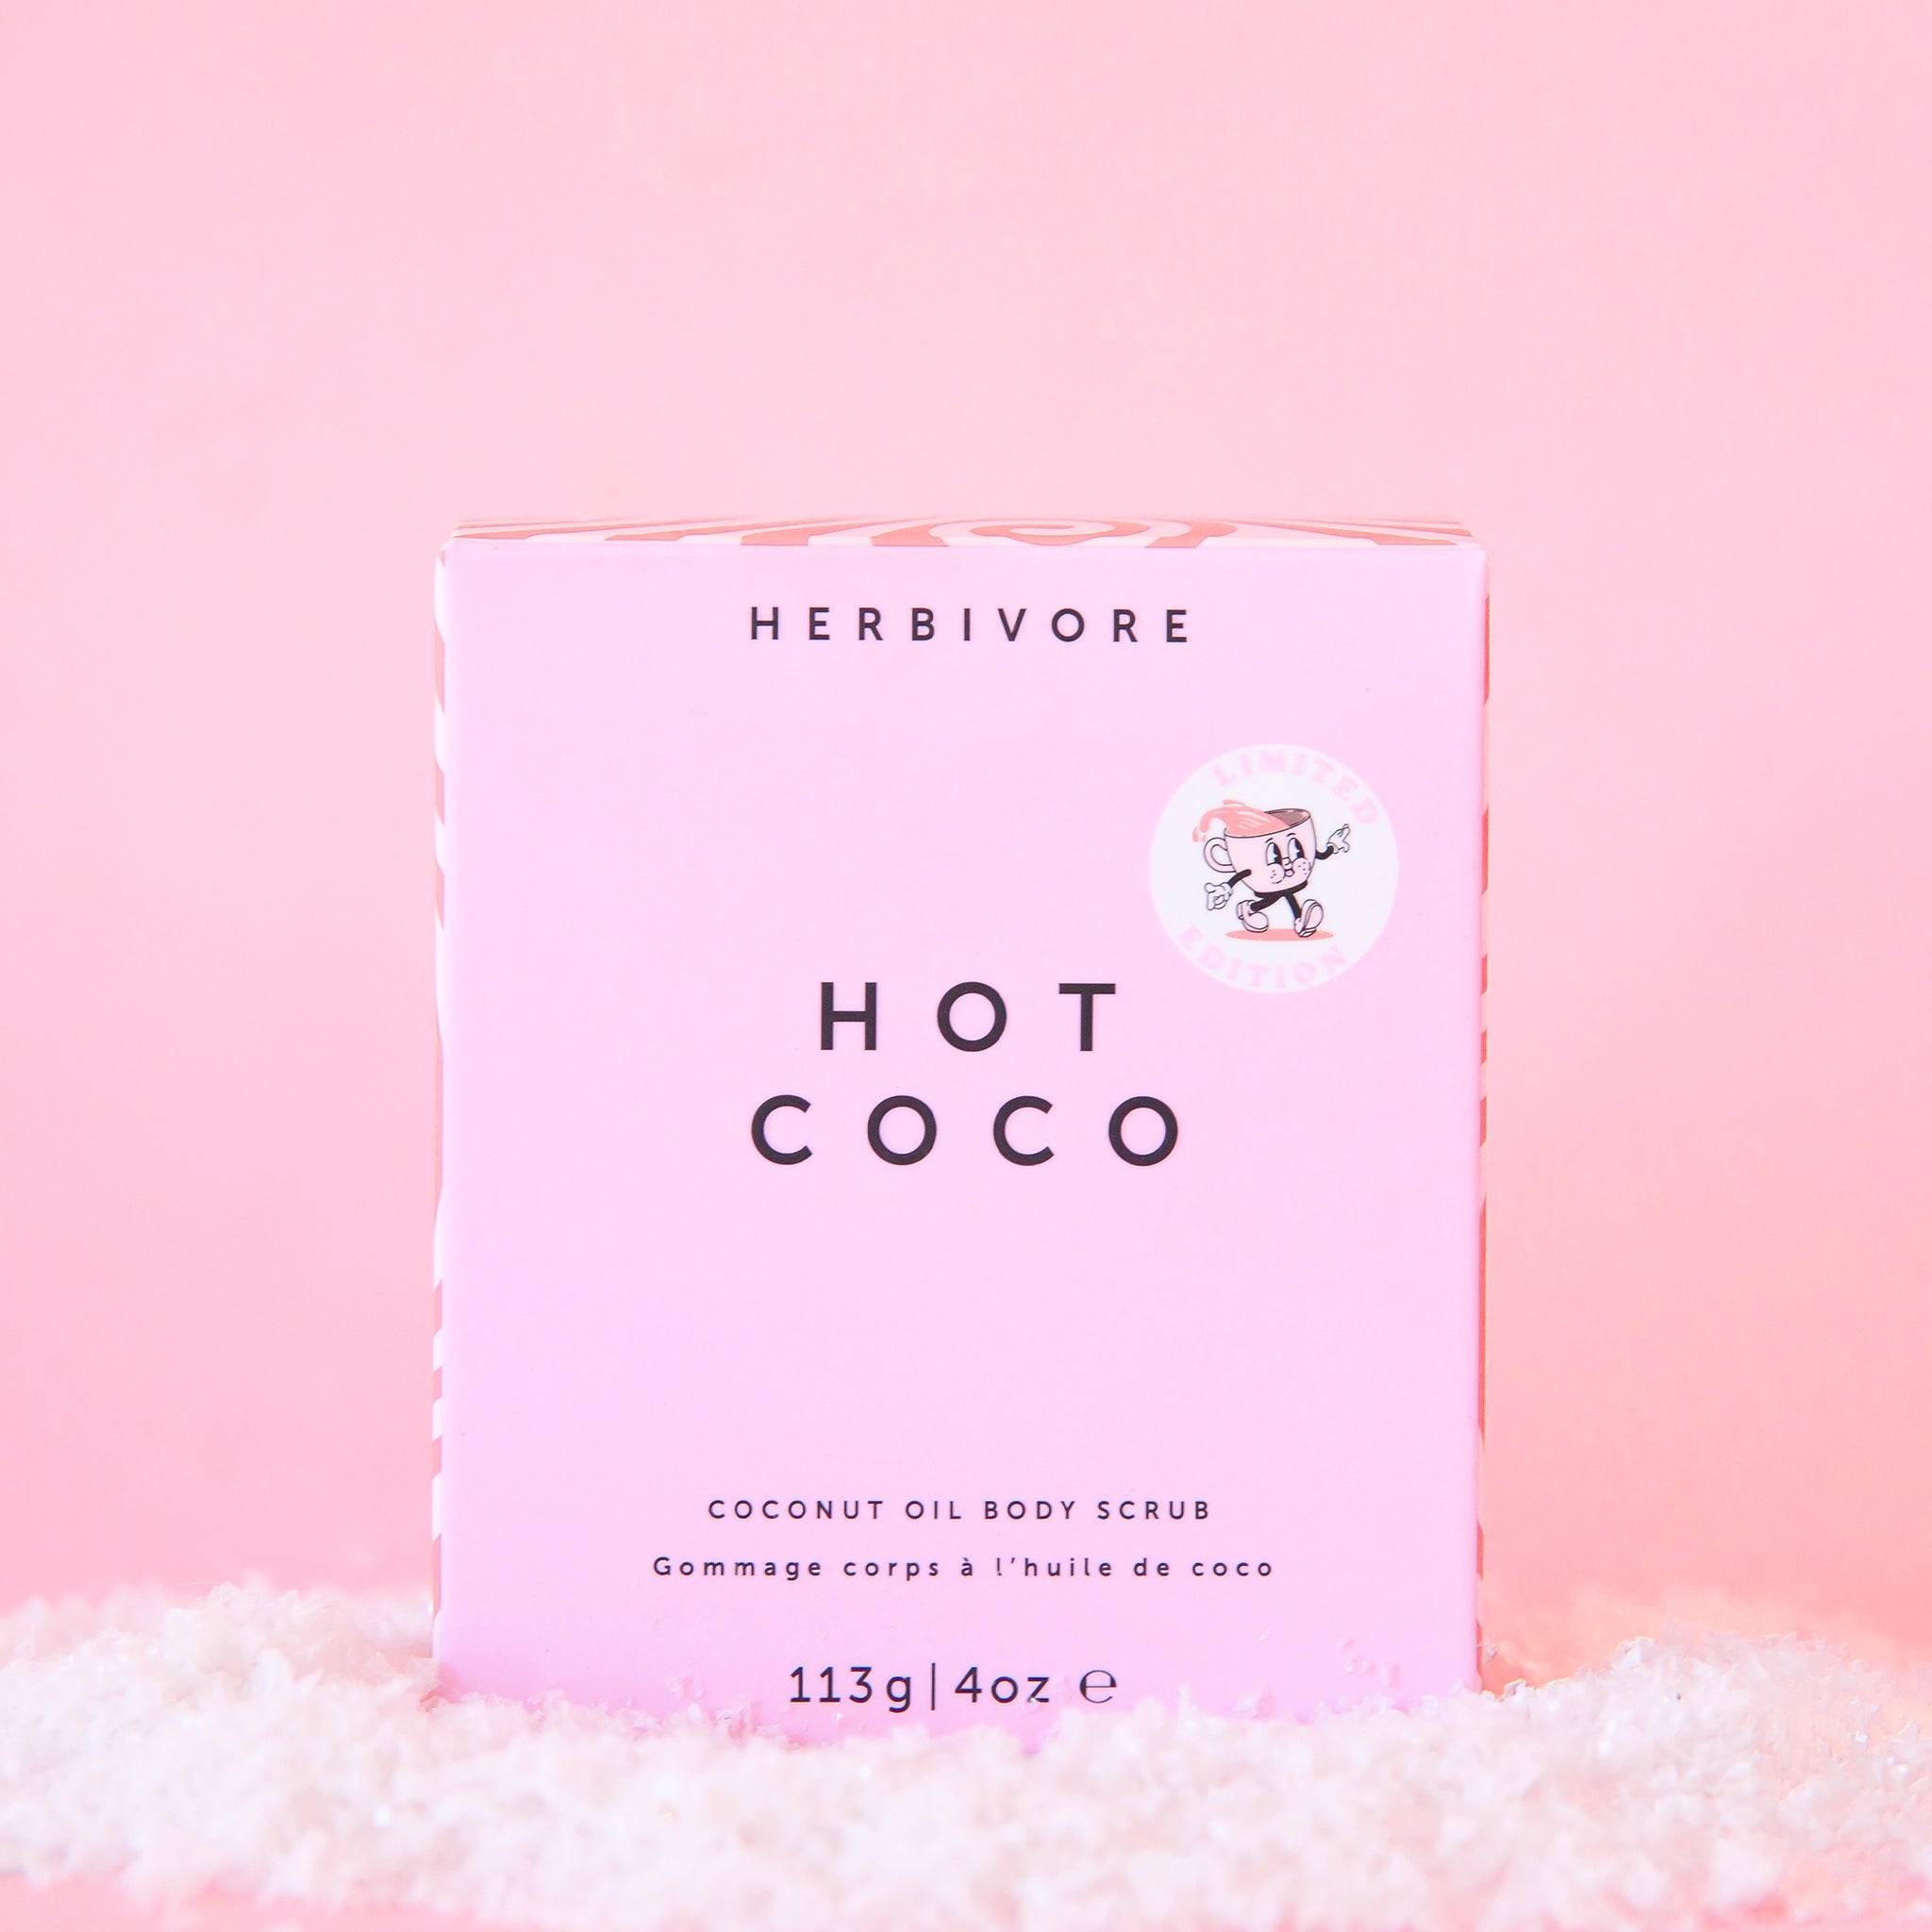 On a pink background is a pink box that reads, "Hot Coco, Coconut Oil Body Scrub".